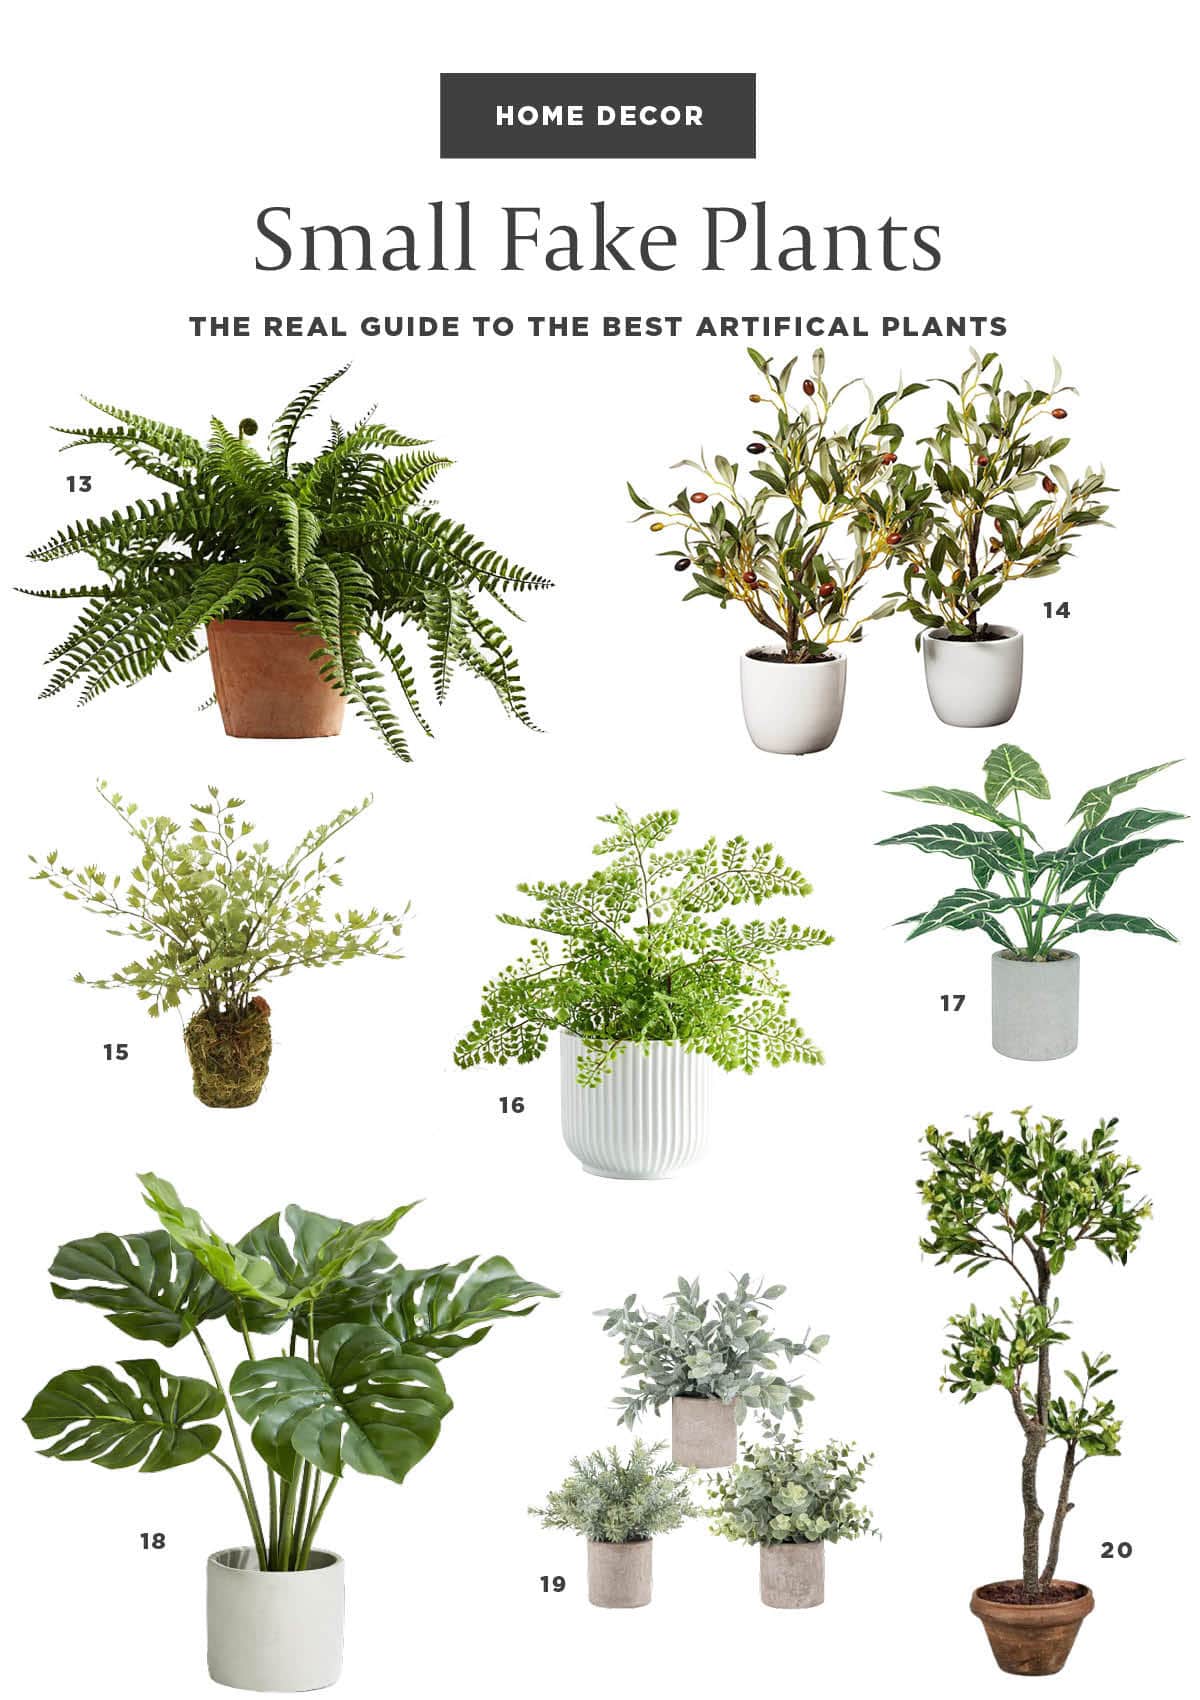 Small fake plants that look real